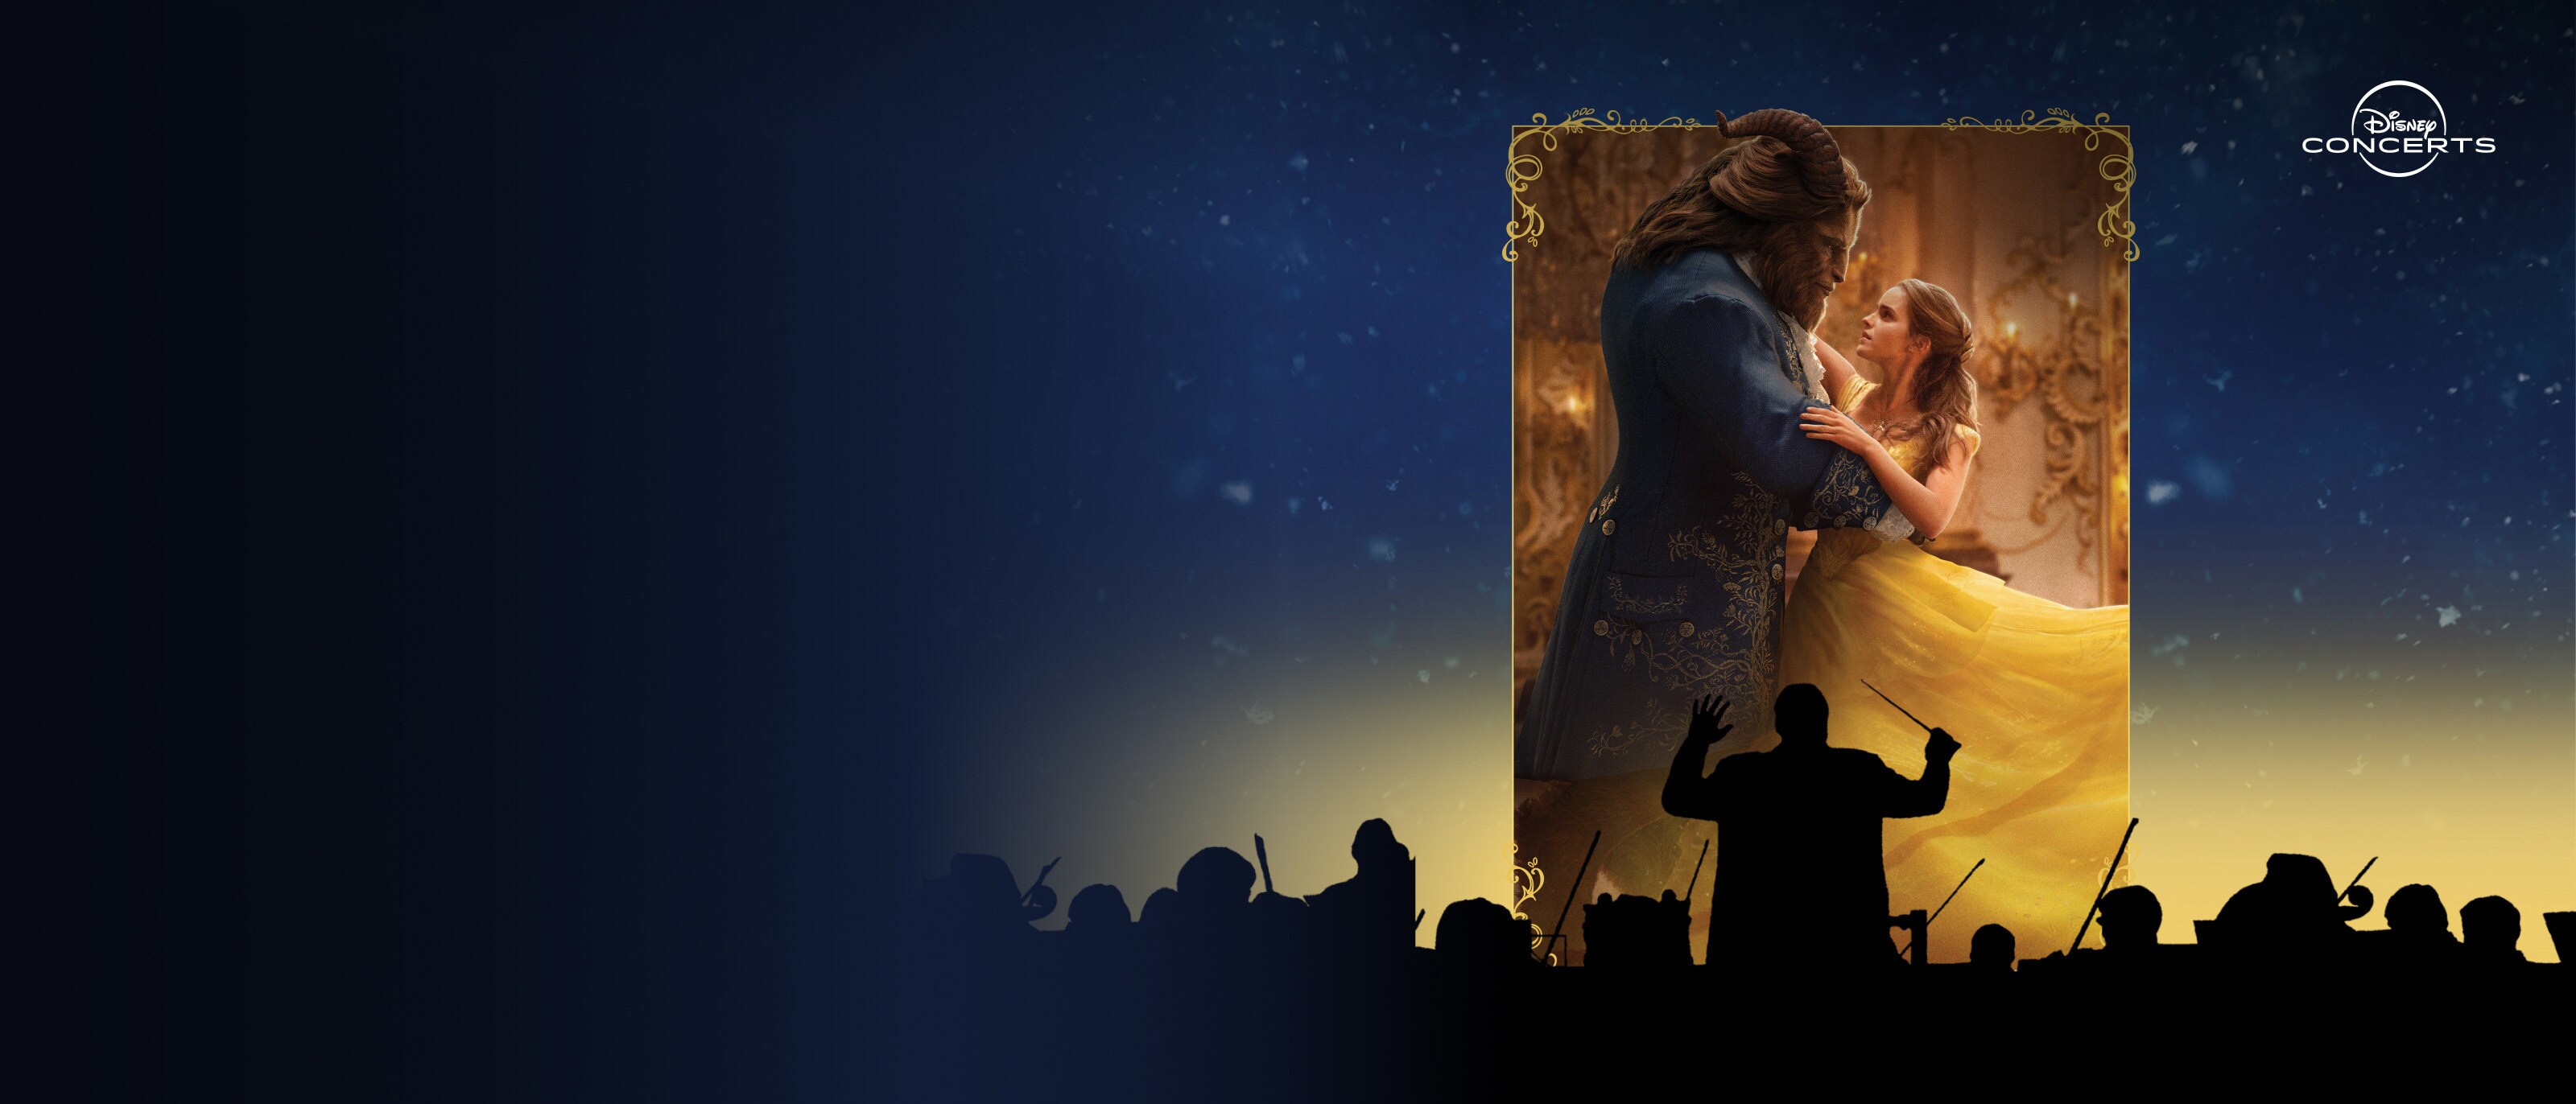 Book tickets to see Beauty and the Beast in Concert